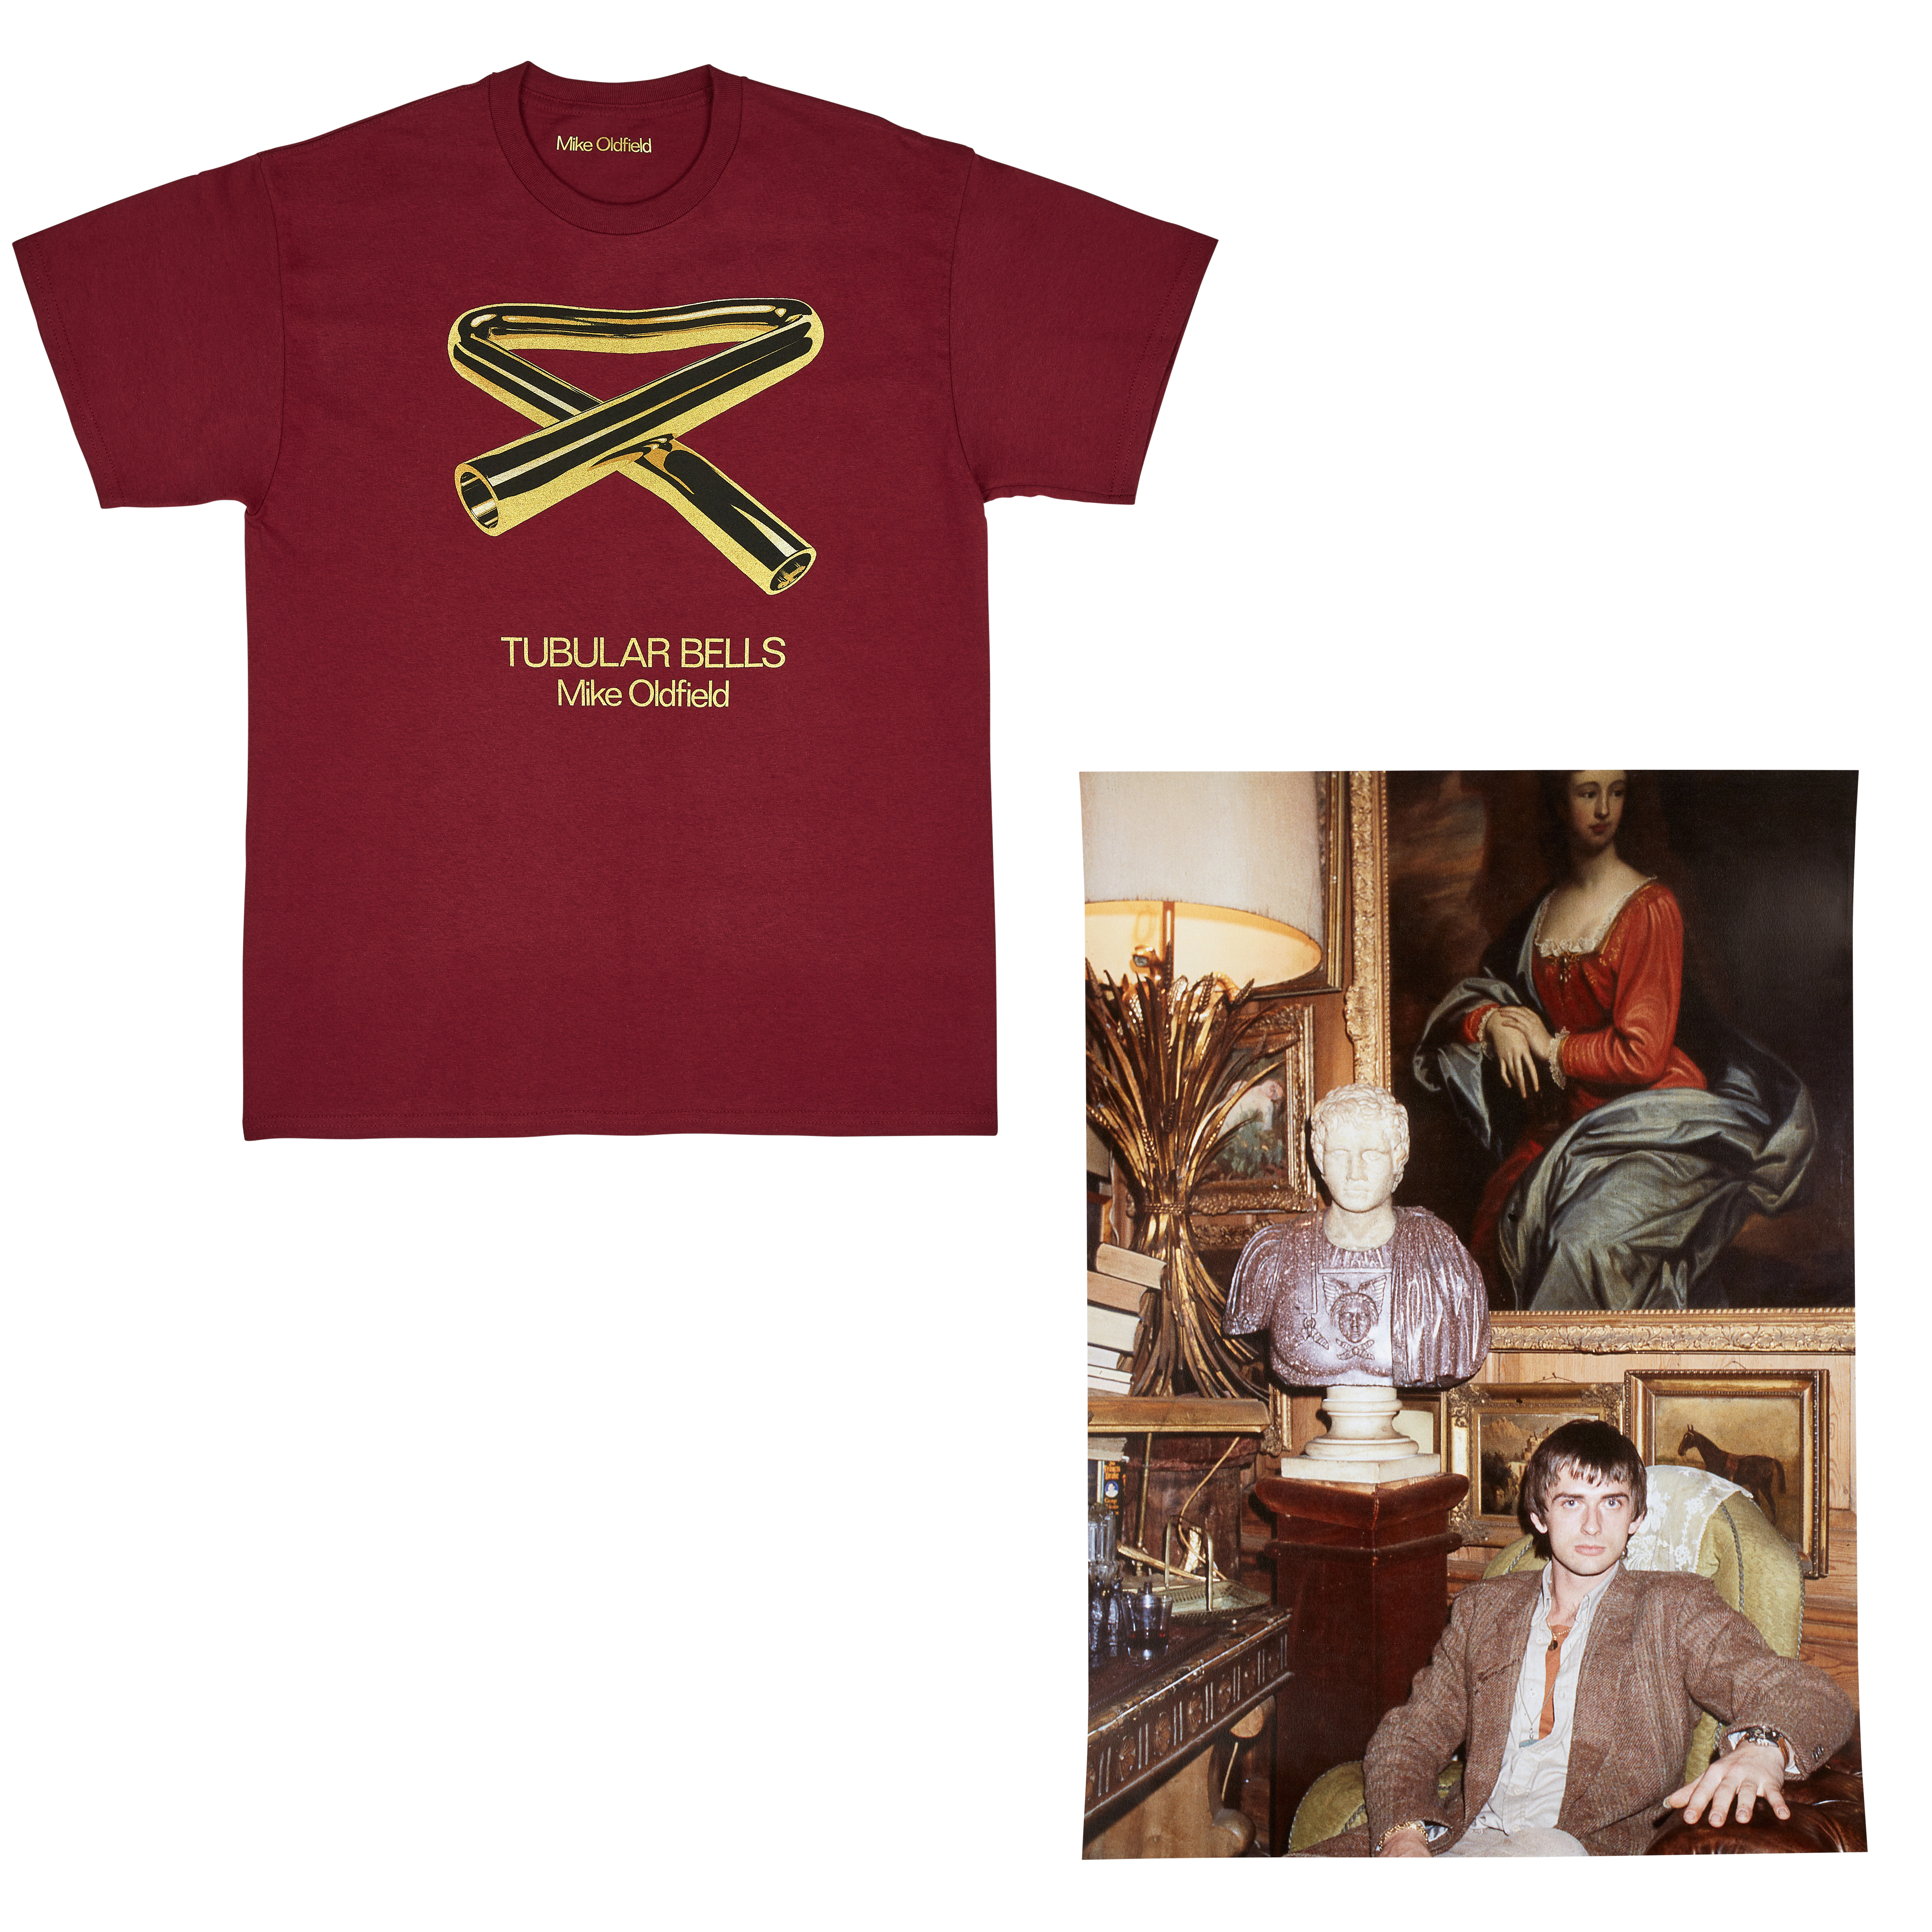 Official Hand Numbered Limited Edition A2 Print (1/2) + Official Tubular Bells Anniversary T-shirt (Maroon)